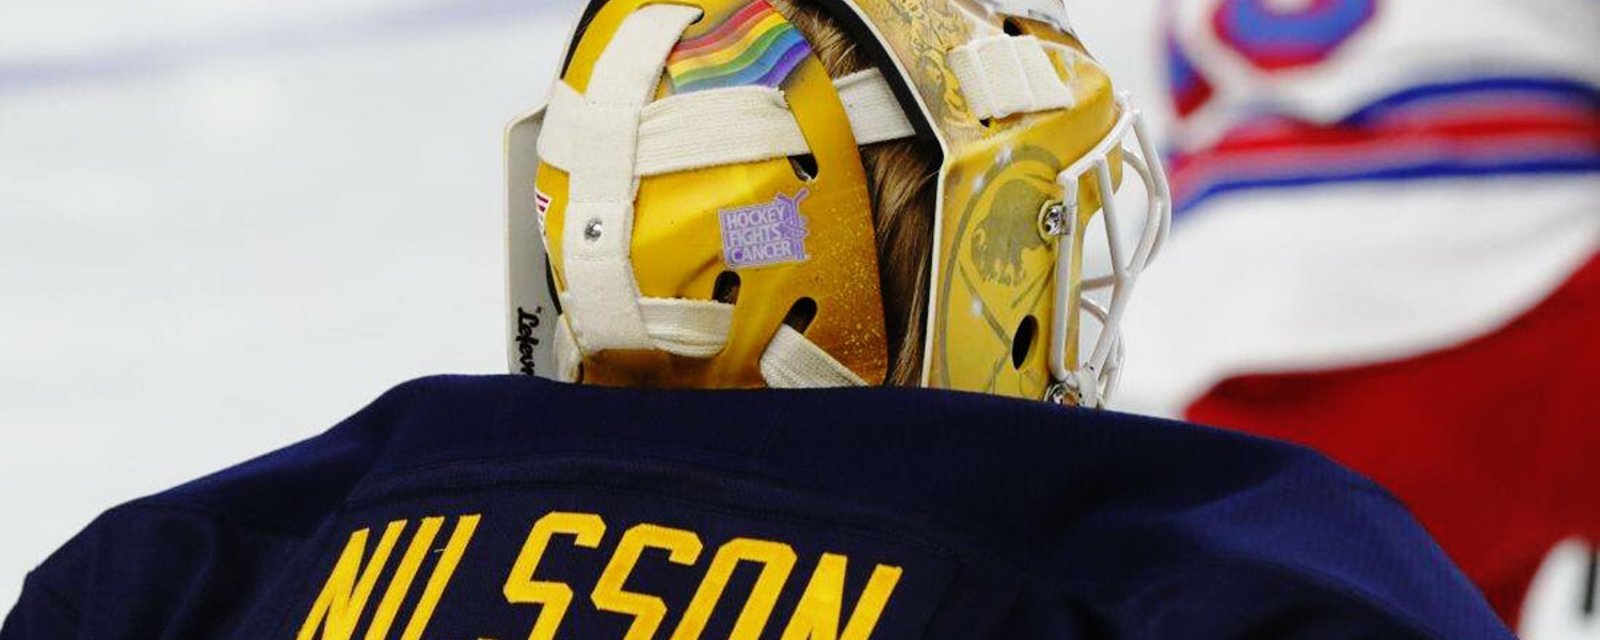 Anders Nilsson hopes to raise awareness with this great gesture!